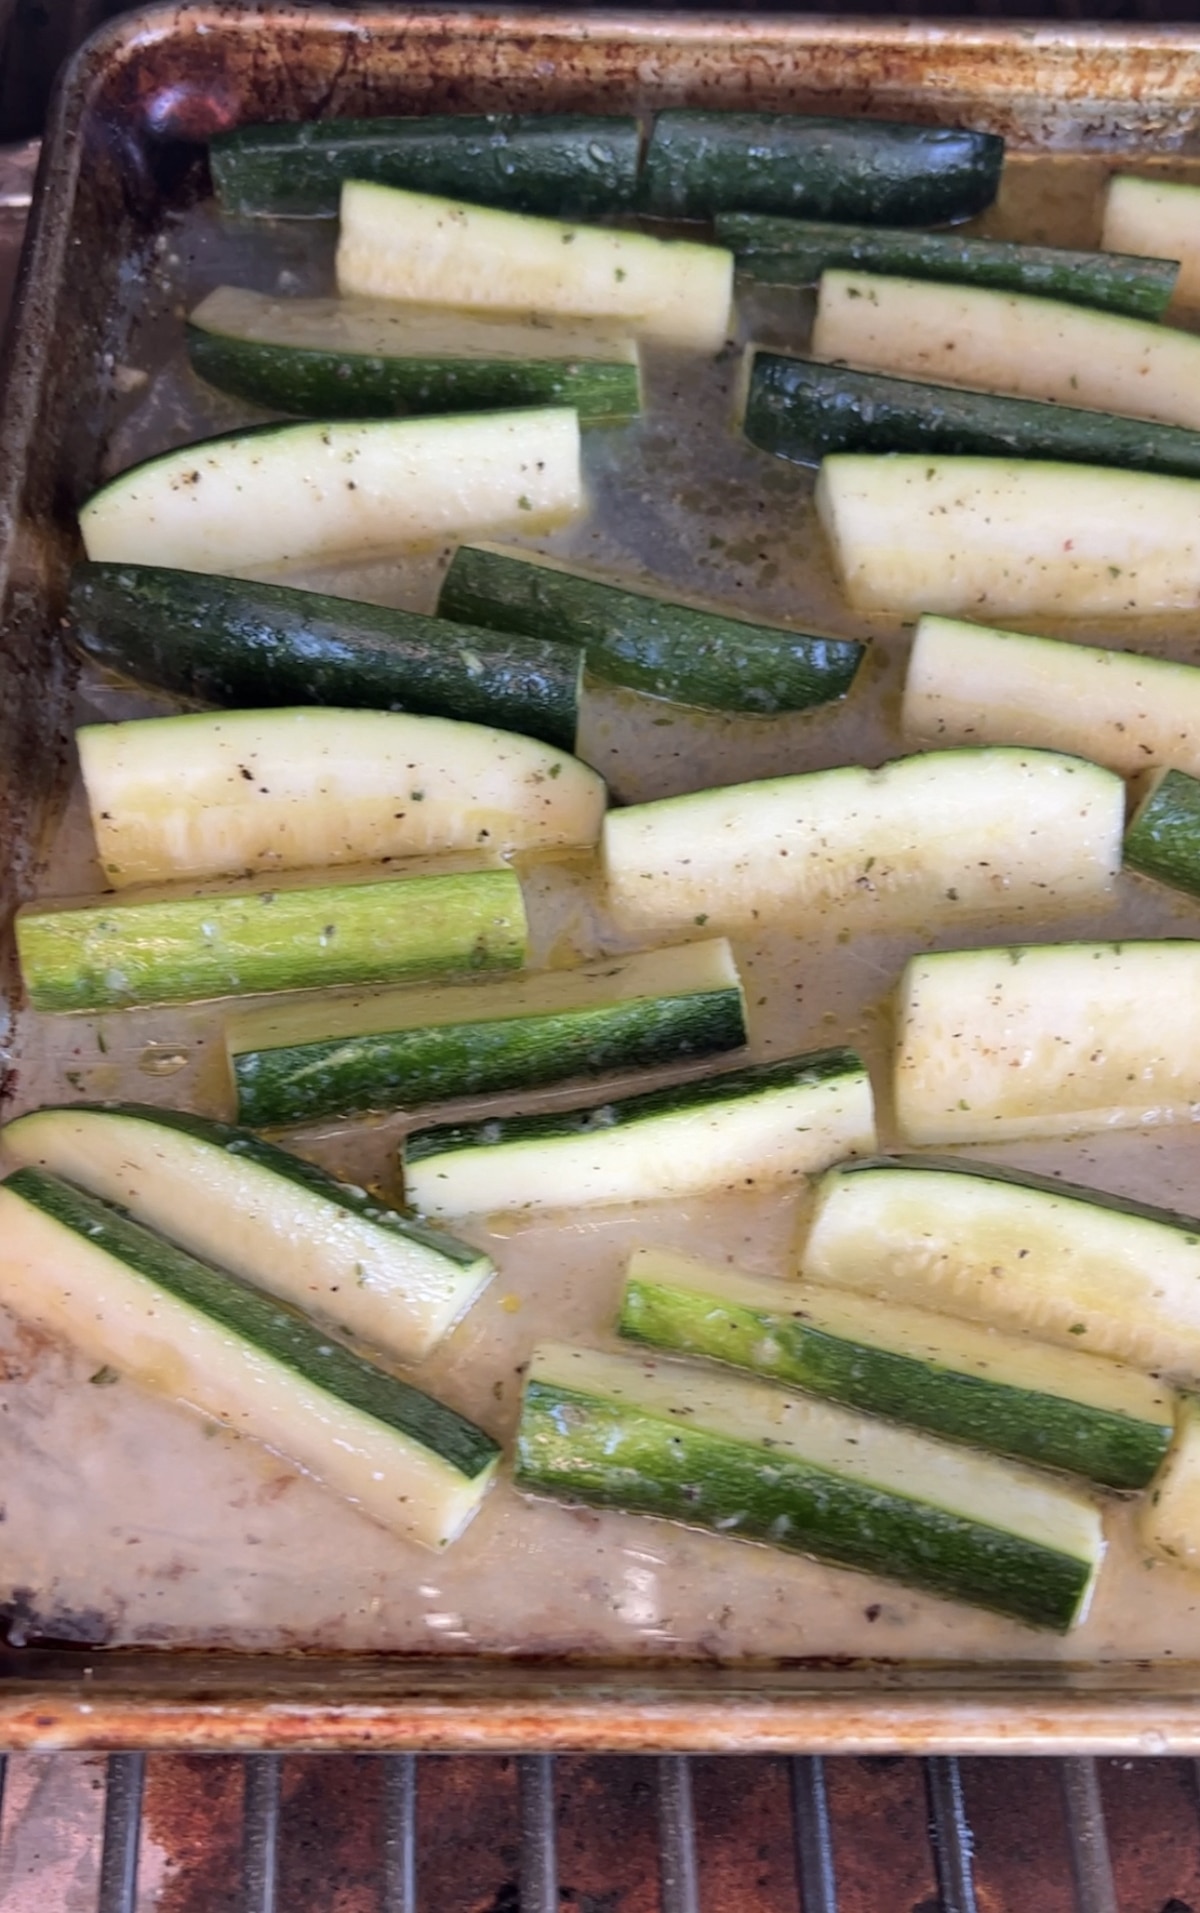 Cooking zucchini spears on a pellet grill.